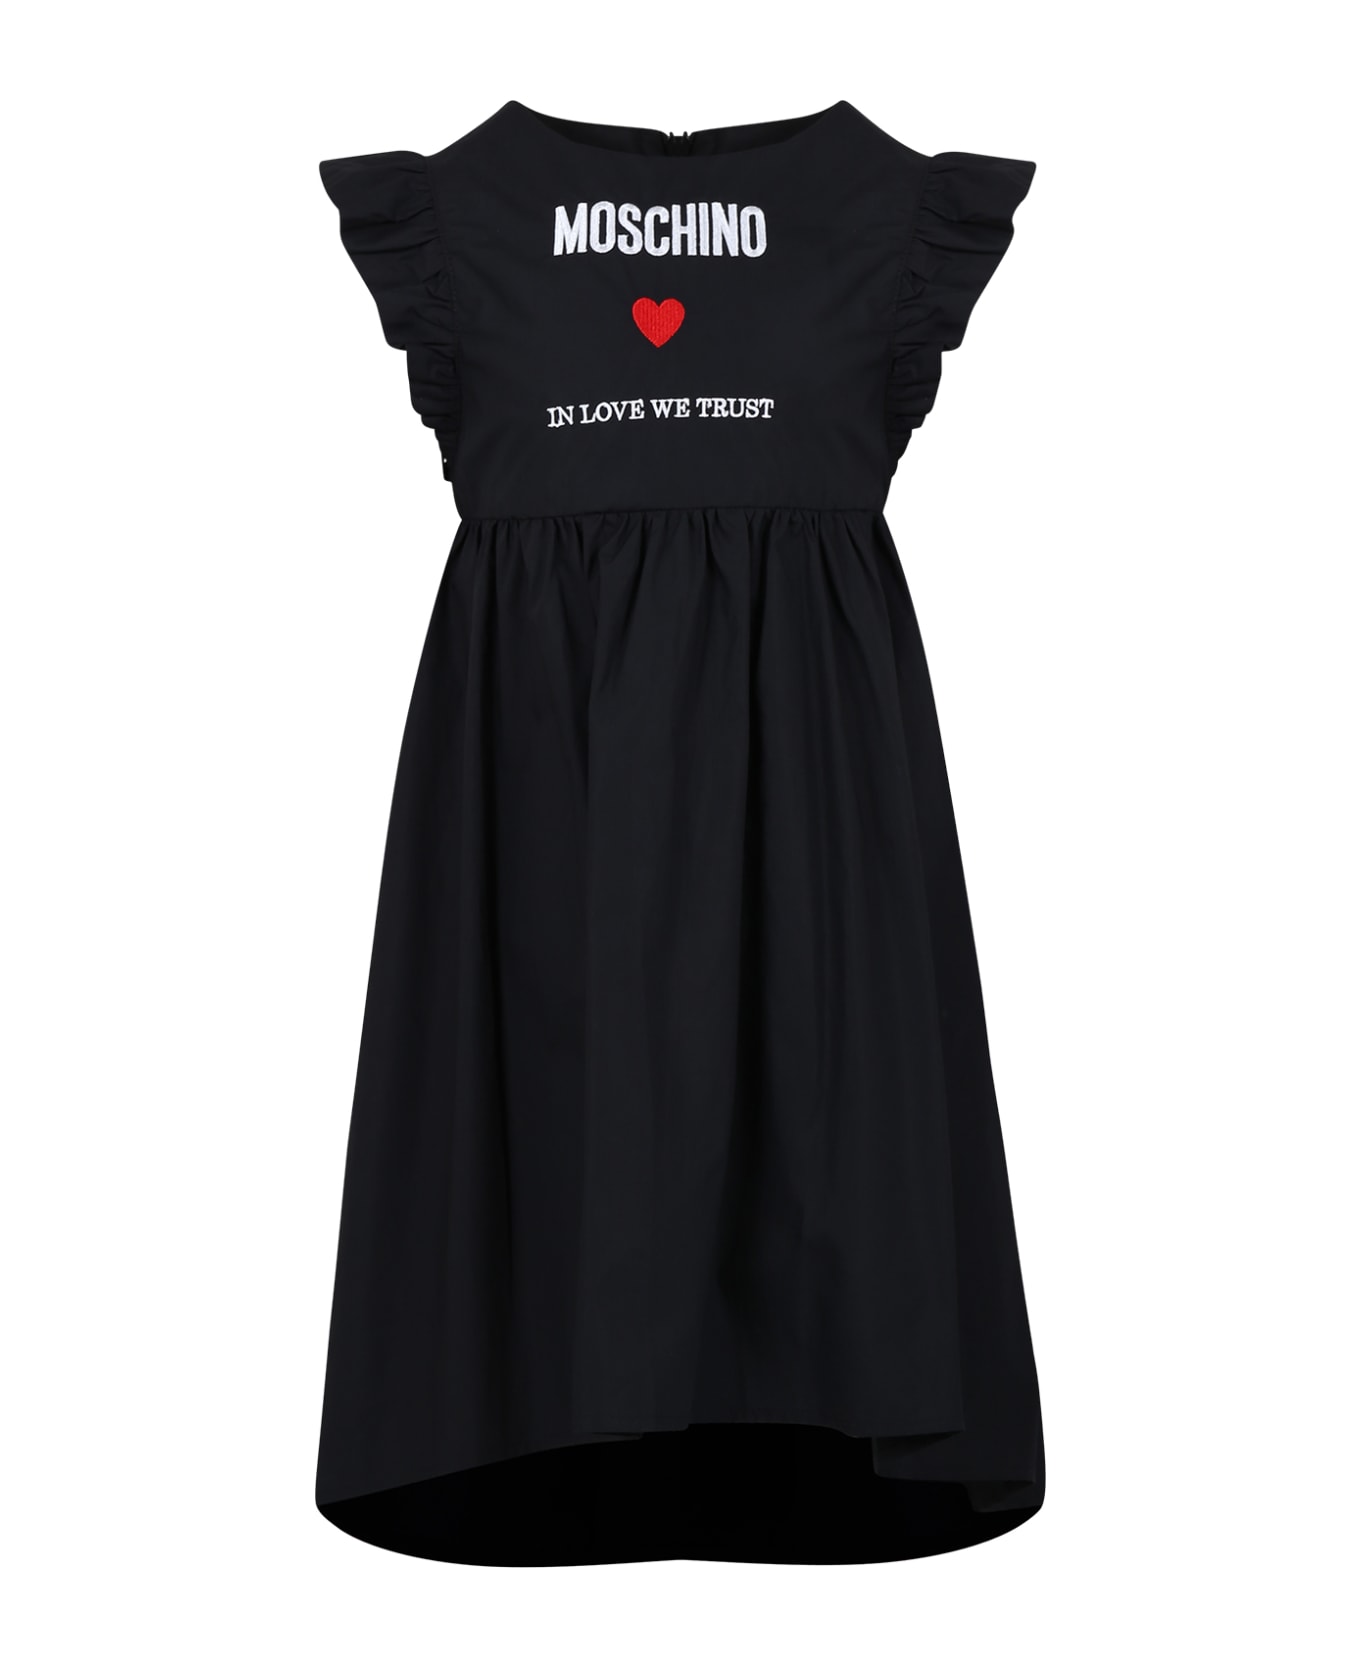 Moschino Black Dress For Girl With Logo And Heart - Black